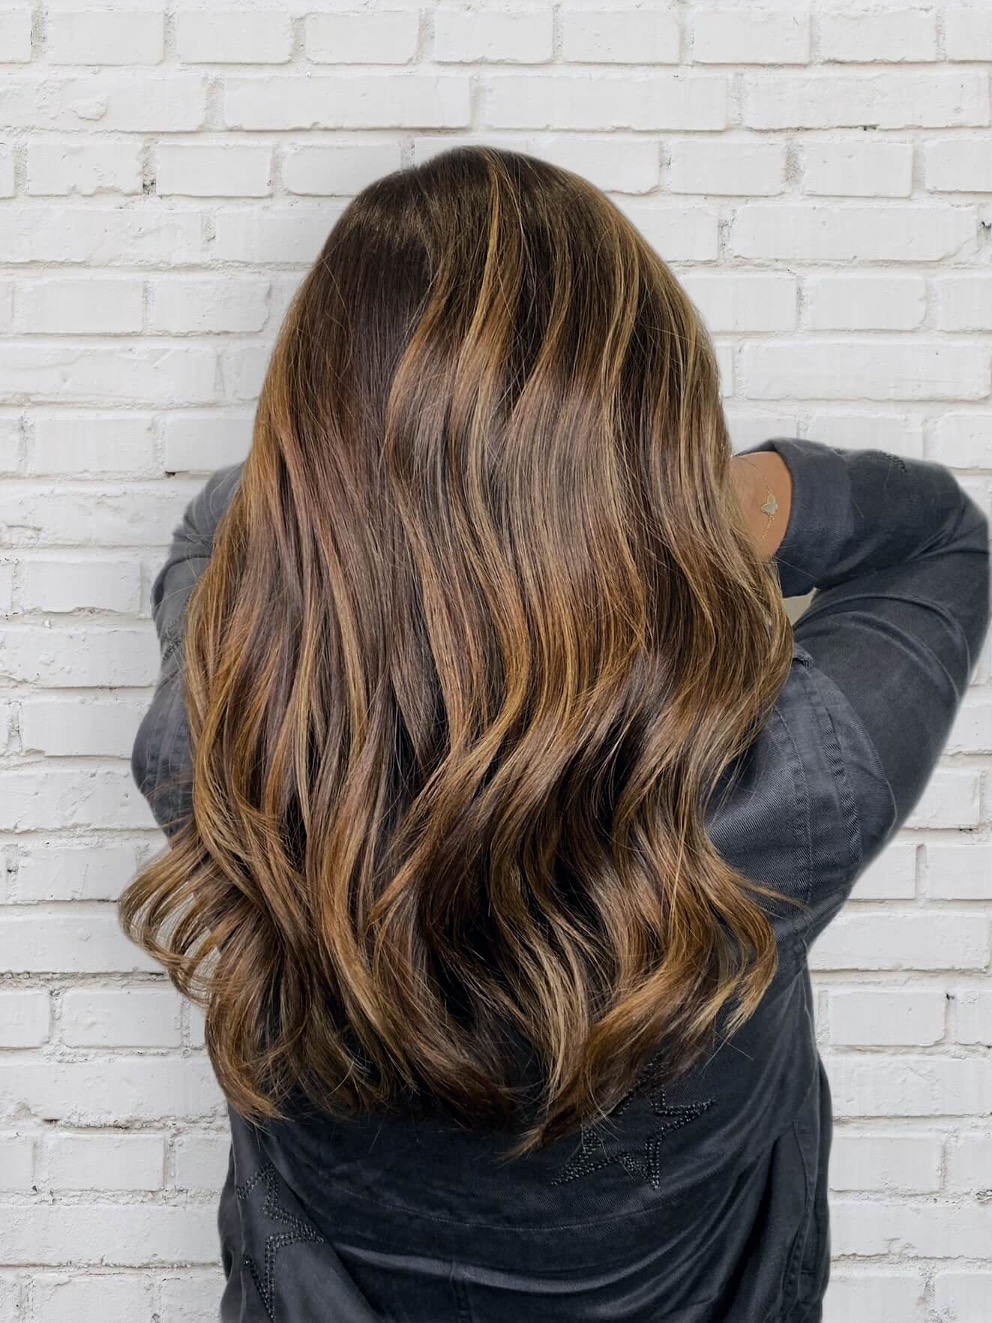 Hair Colour Trend 2022: Caramel Falling Stars Highlights designed by Salon Director of Chez Vous, Victor Liu